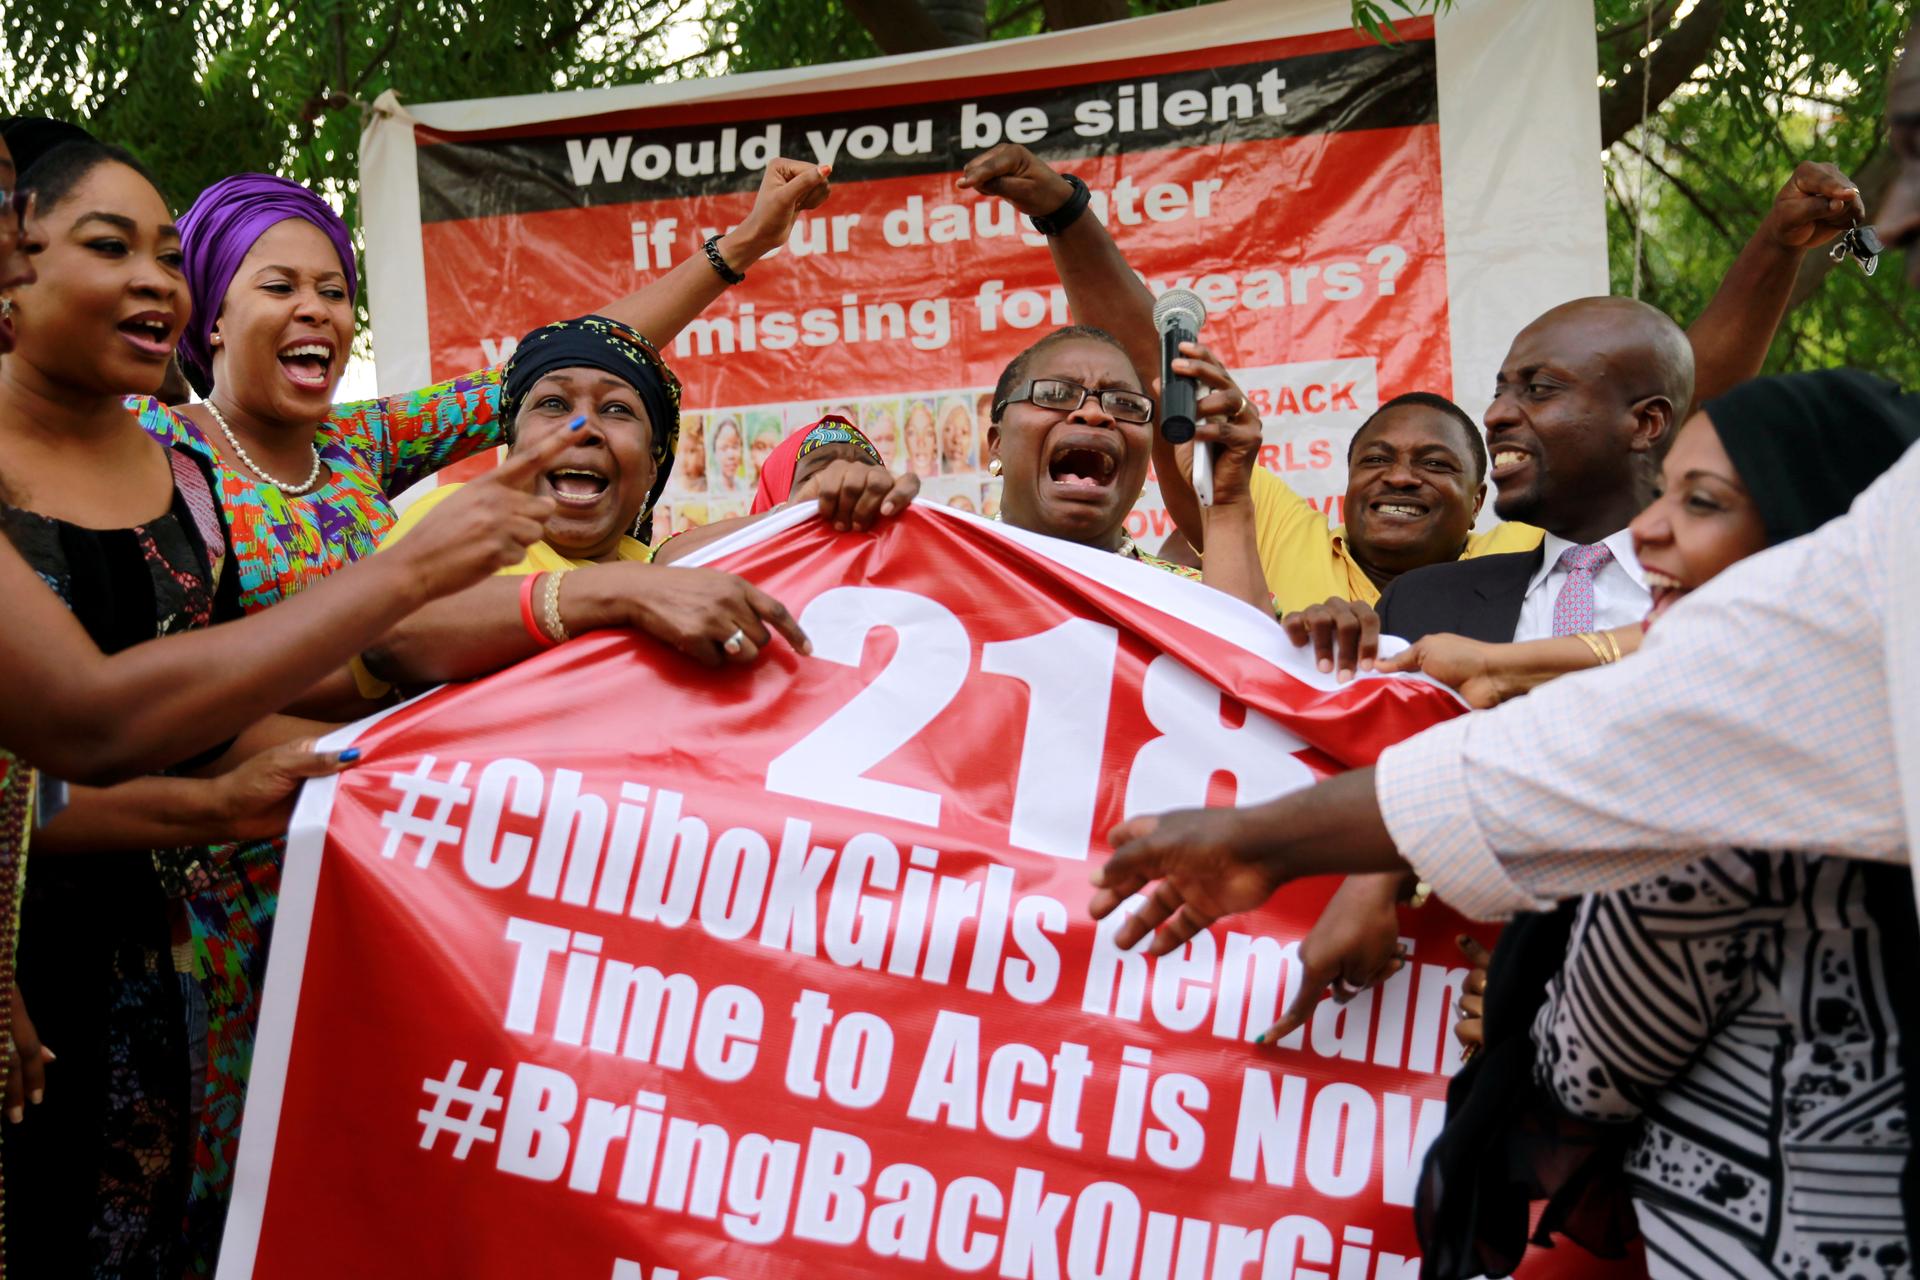 Members of the #BringBackOurGirls (#BBOG) campaign react on the presentation of a banner which shows 